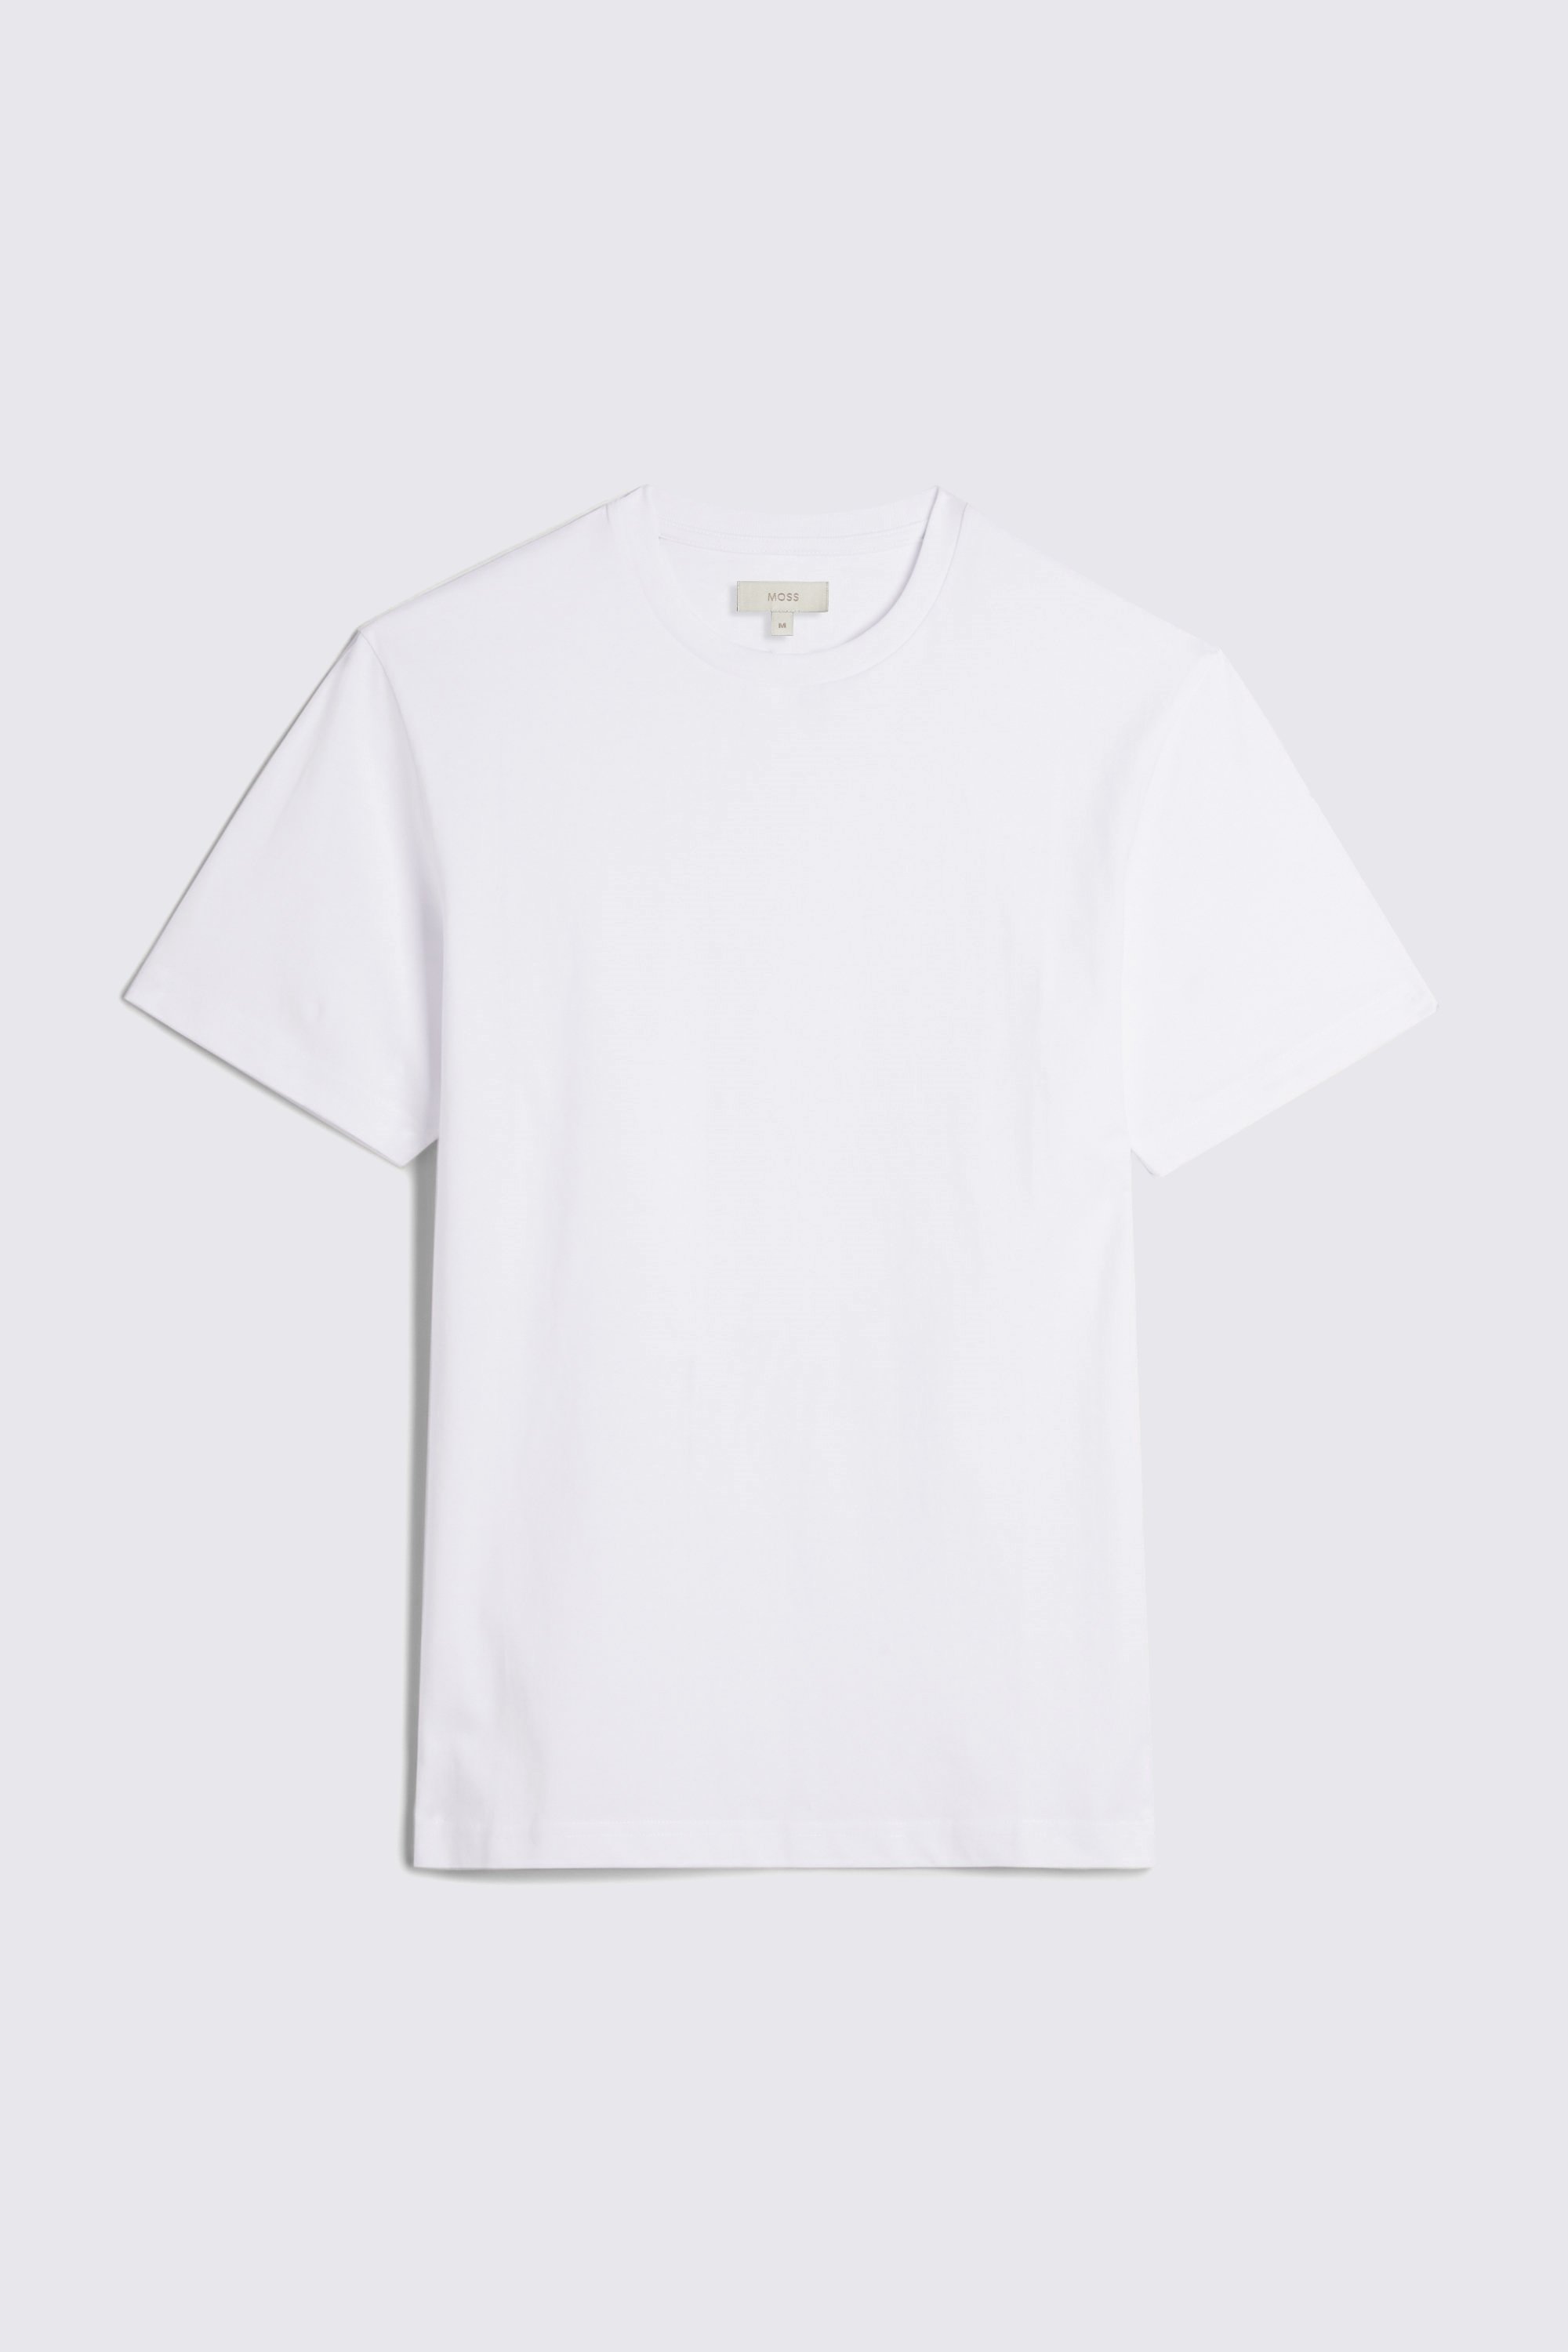 White Crew Neck T-Shirt | Buy Online at Moss